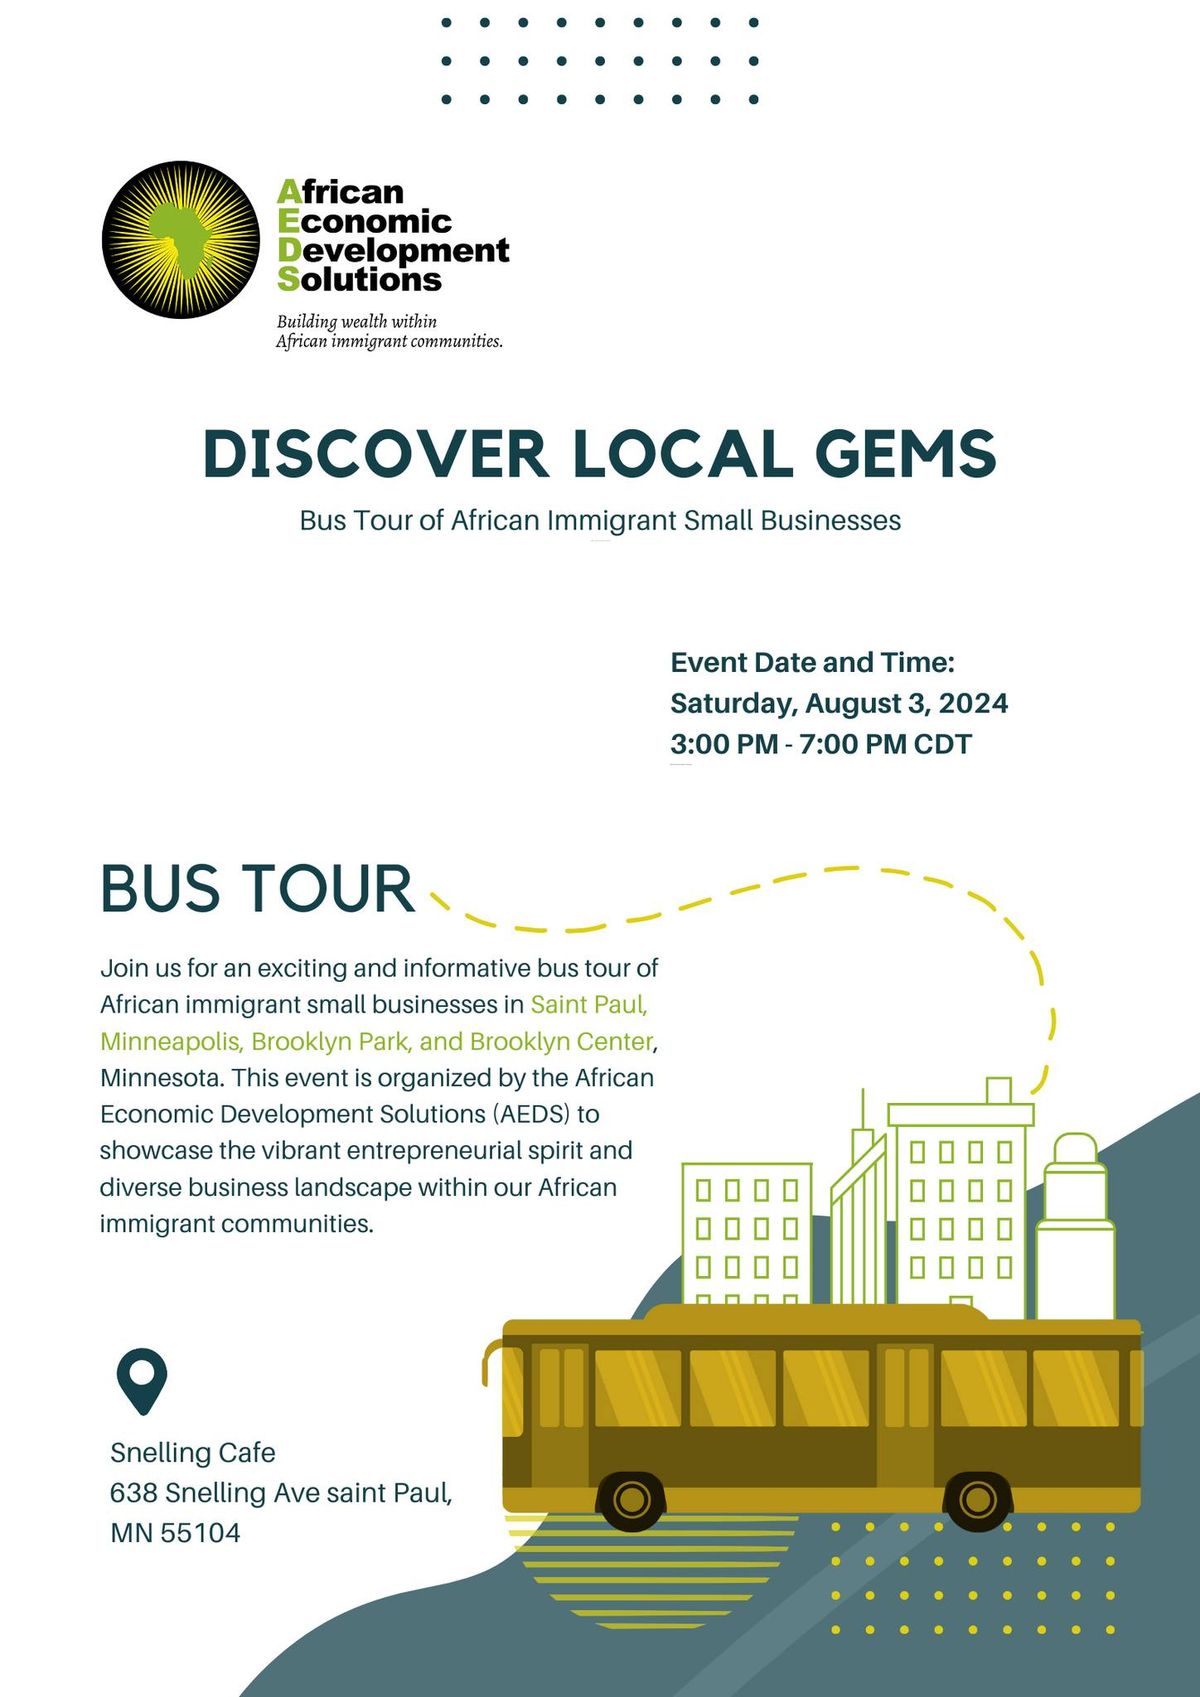 Discover Local Gems: Bus Tour of African Immigrant Small Businesses